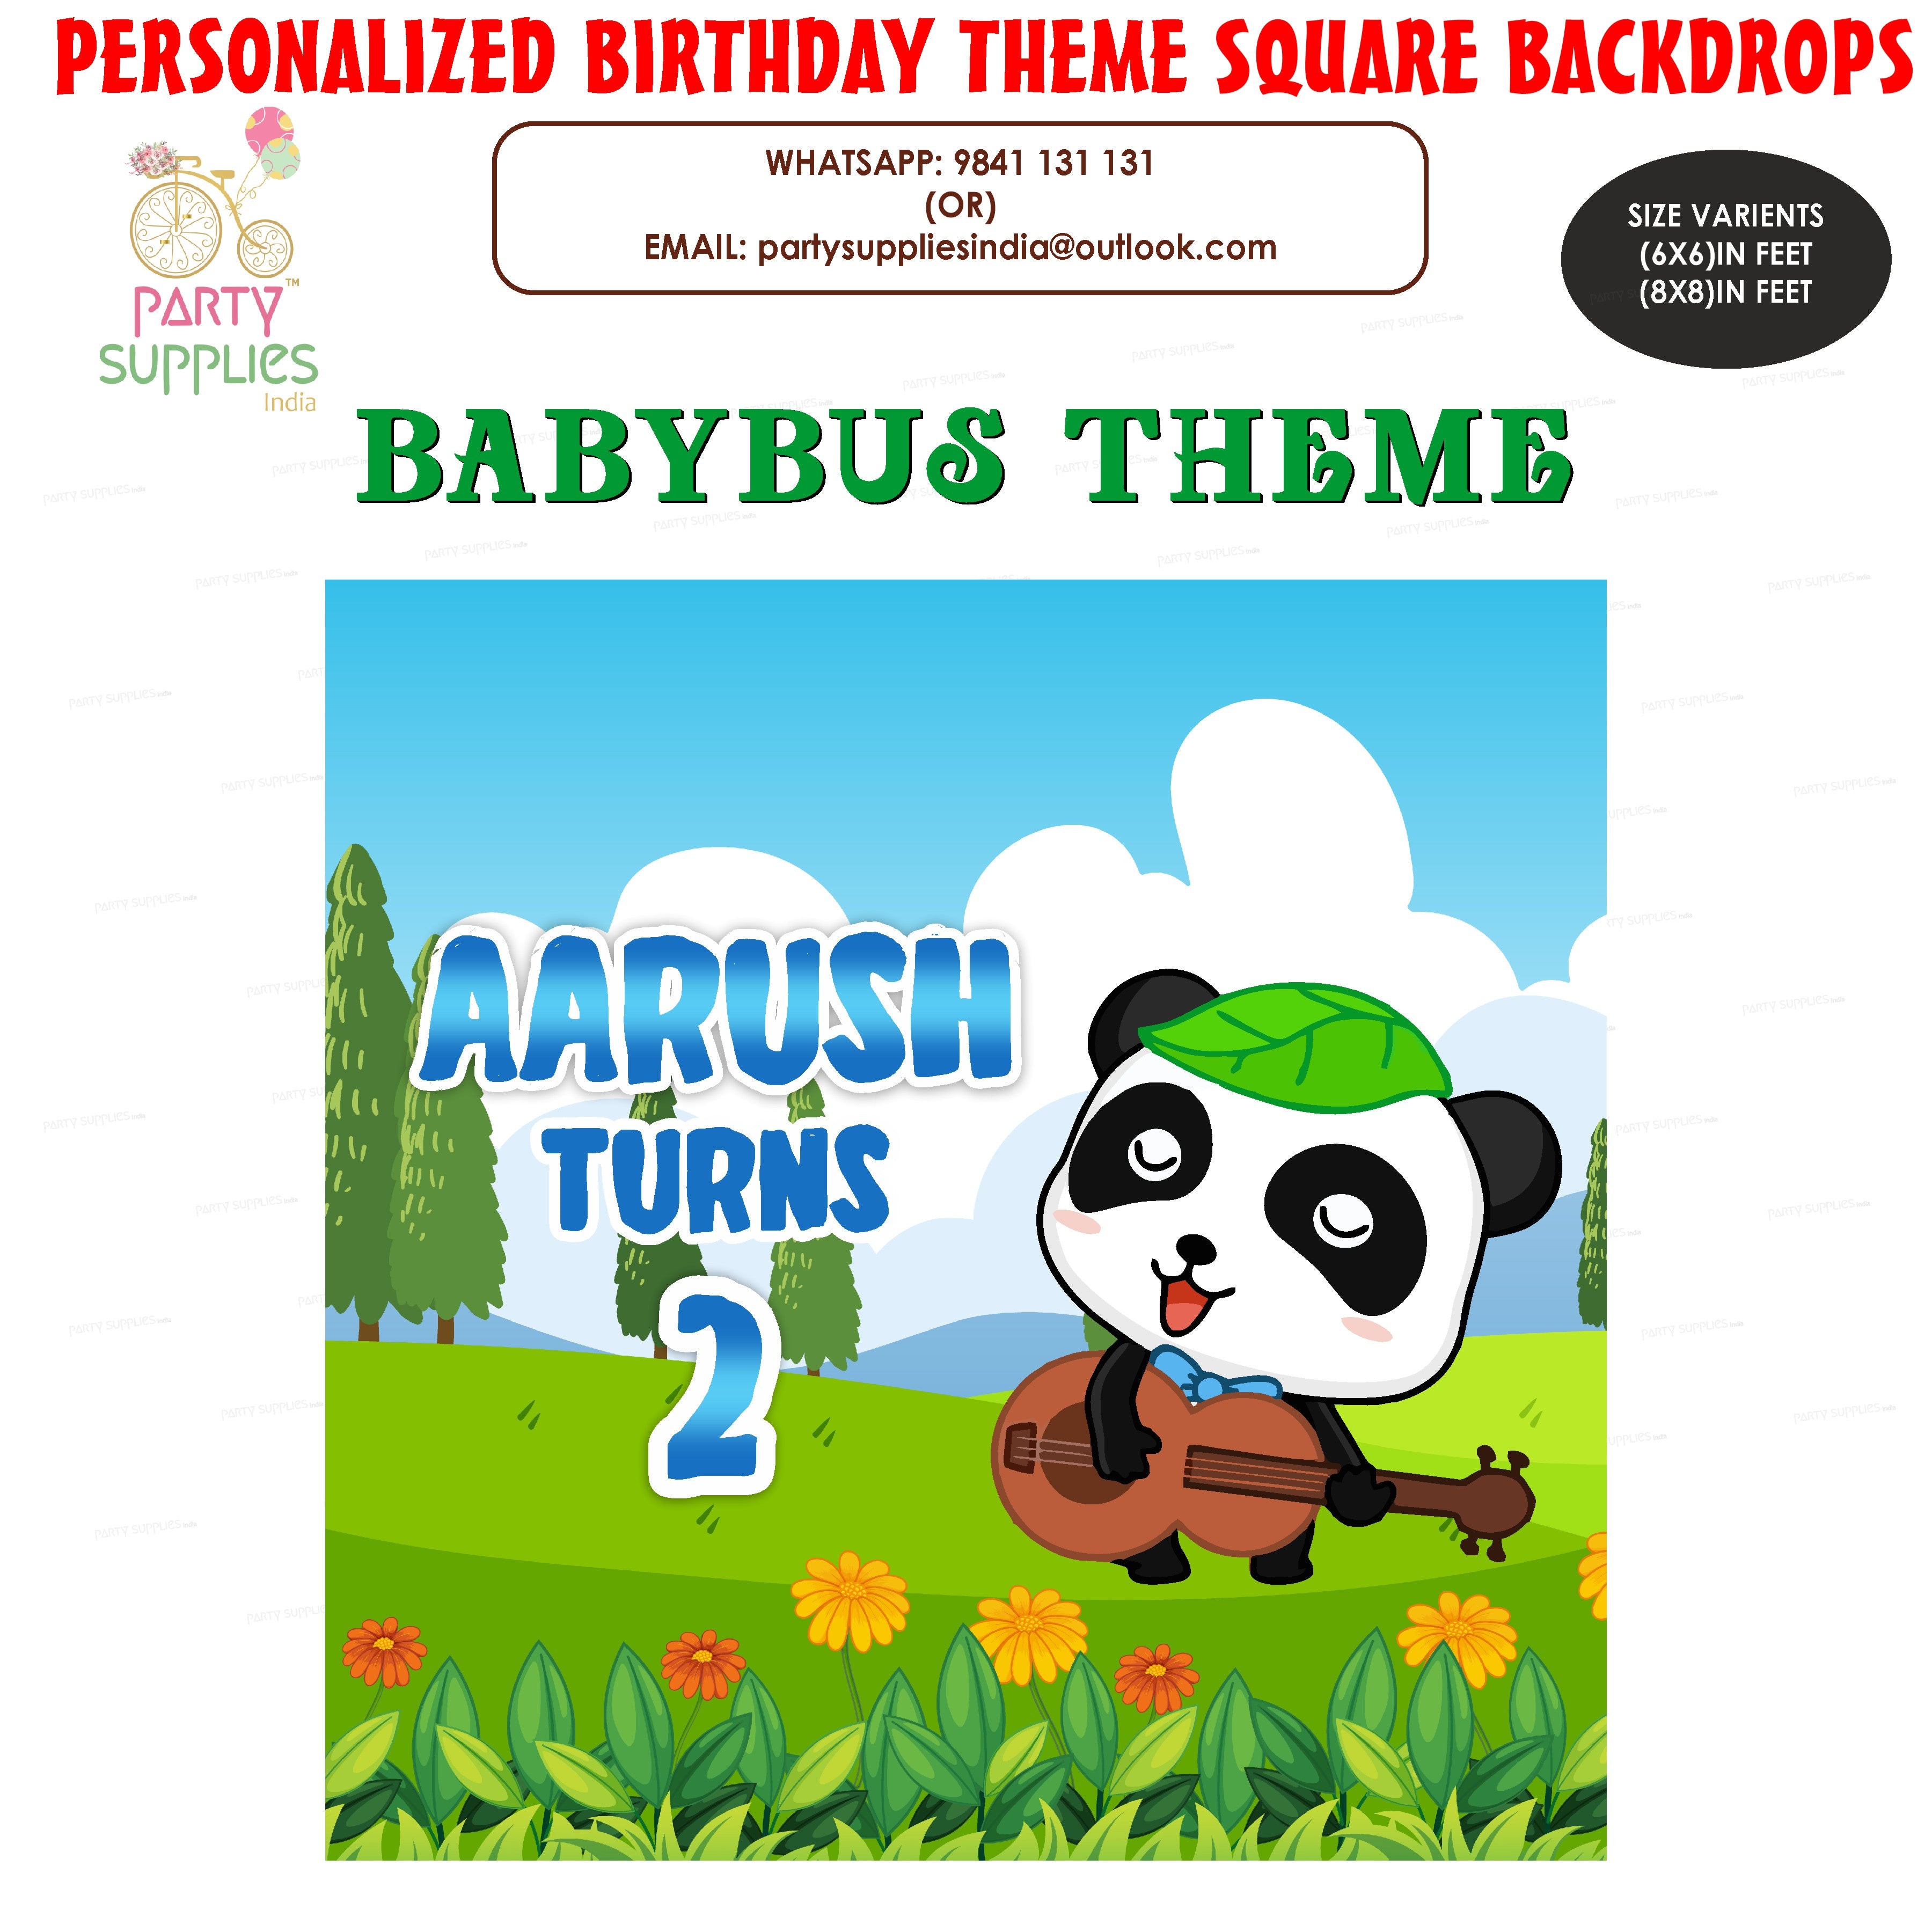 PSI Baby Bus Theme Personalized Square Backdrop